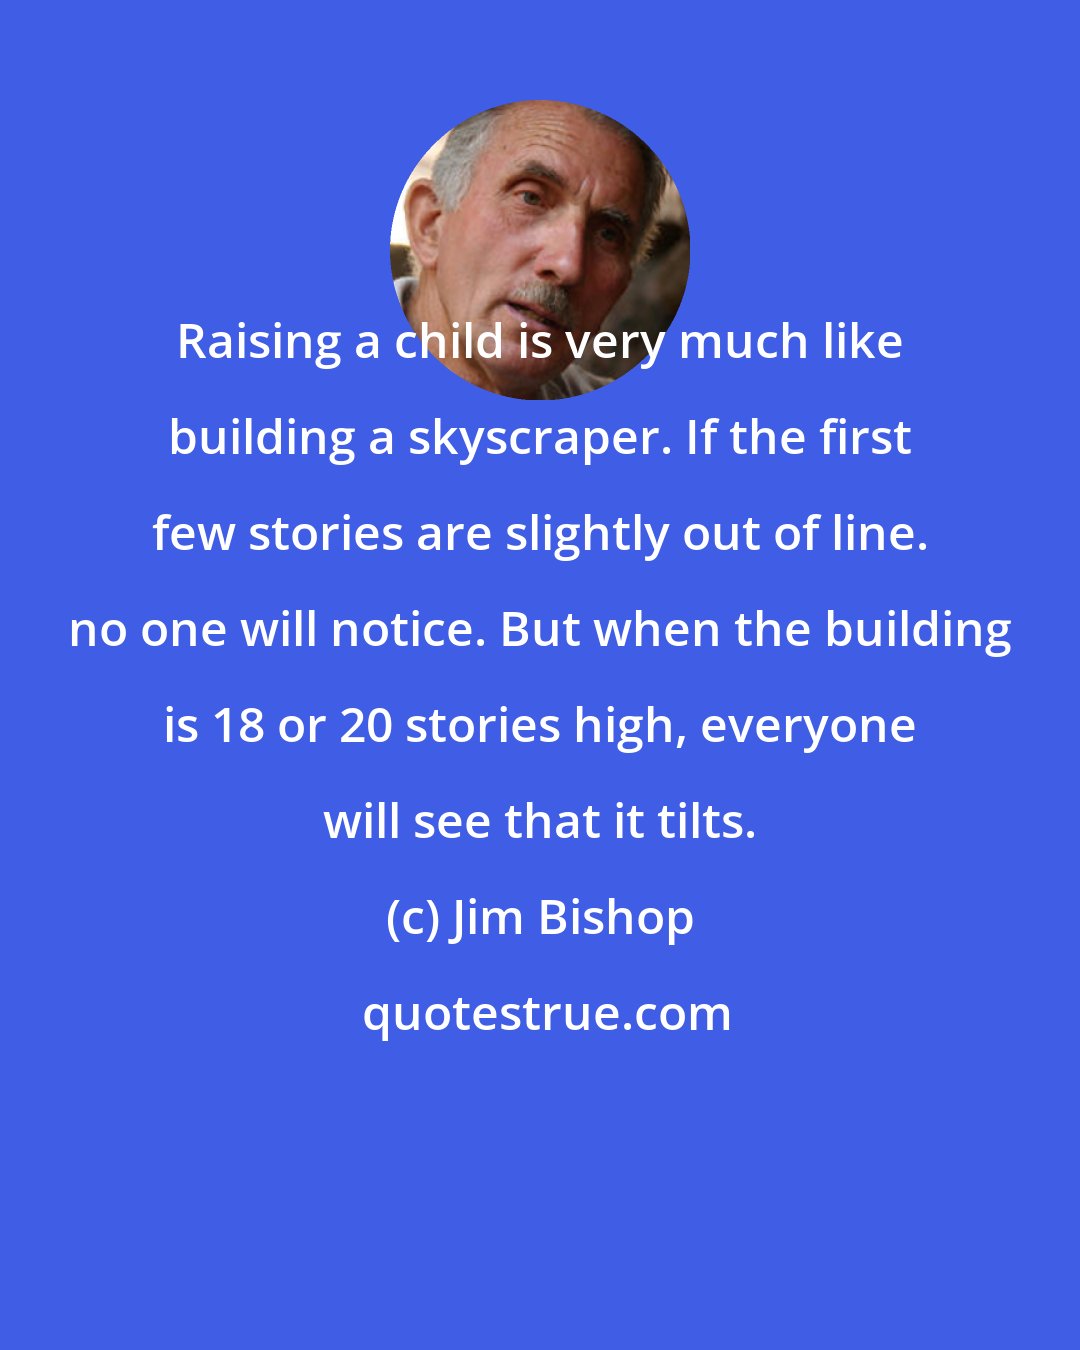 Jim Bishop: Raising a child is very much like building a skyscraper. If the first few stories are slightly out of line. no one will notice. But when the building is 18 or 20 stories high, everyone will see that it tilts.